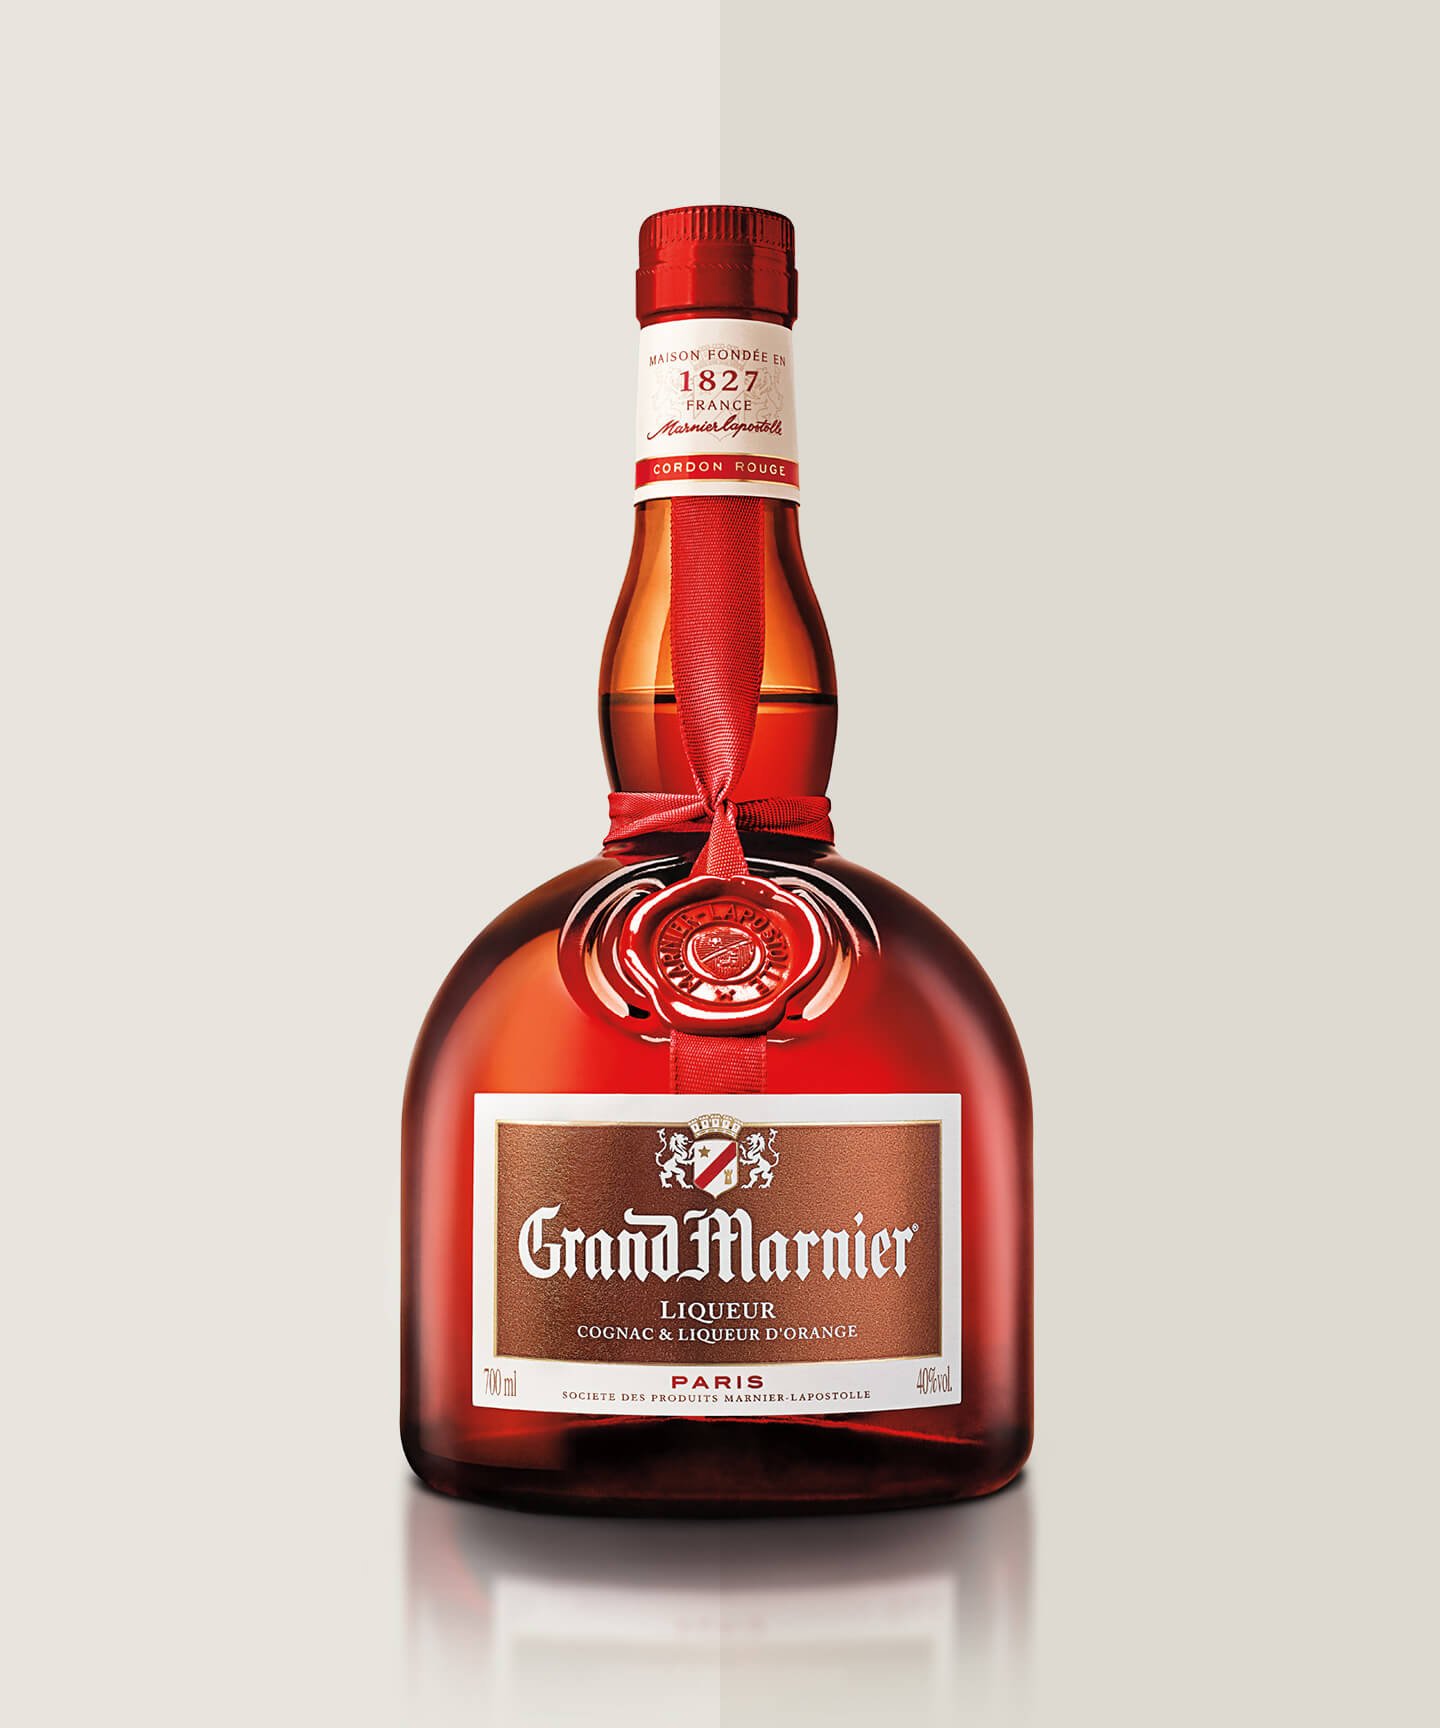 A photo of Grand Marnier Cordon Rouge from the maker's website